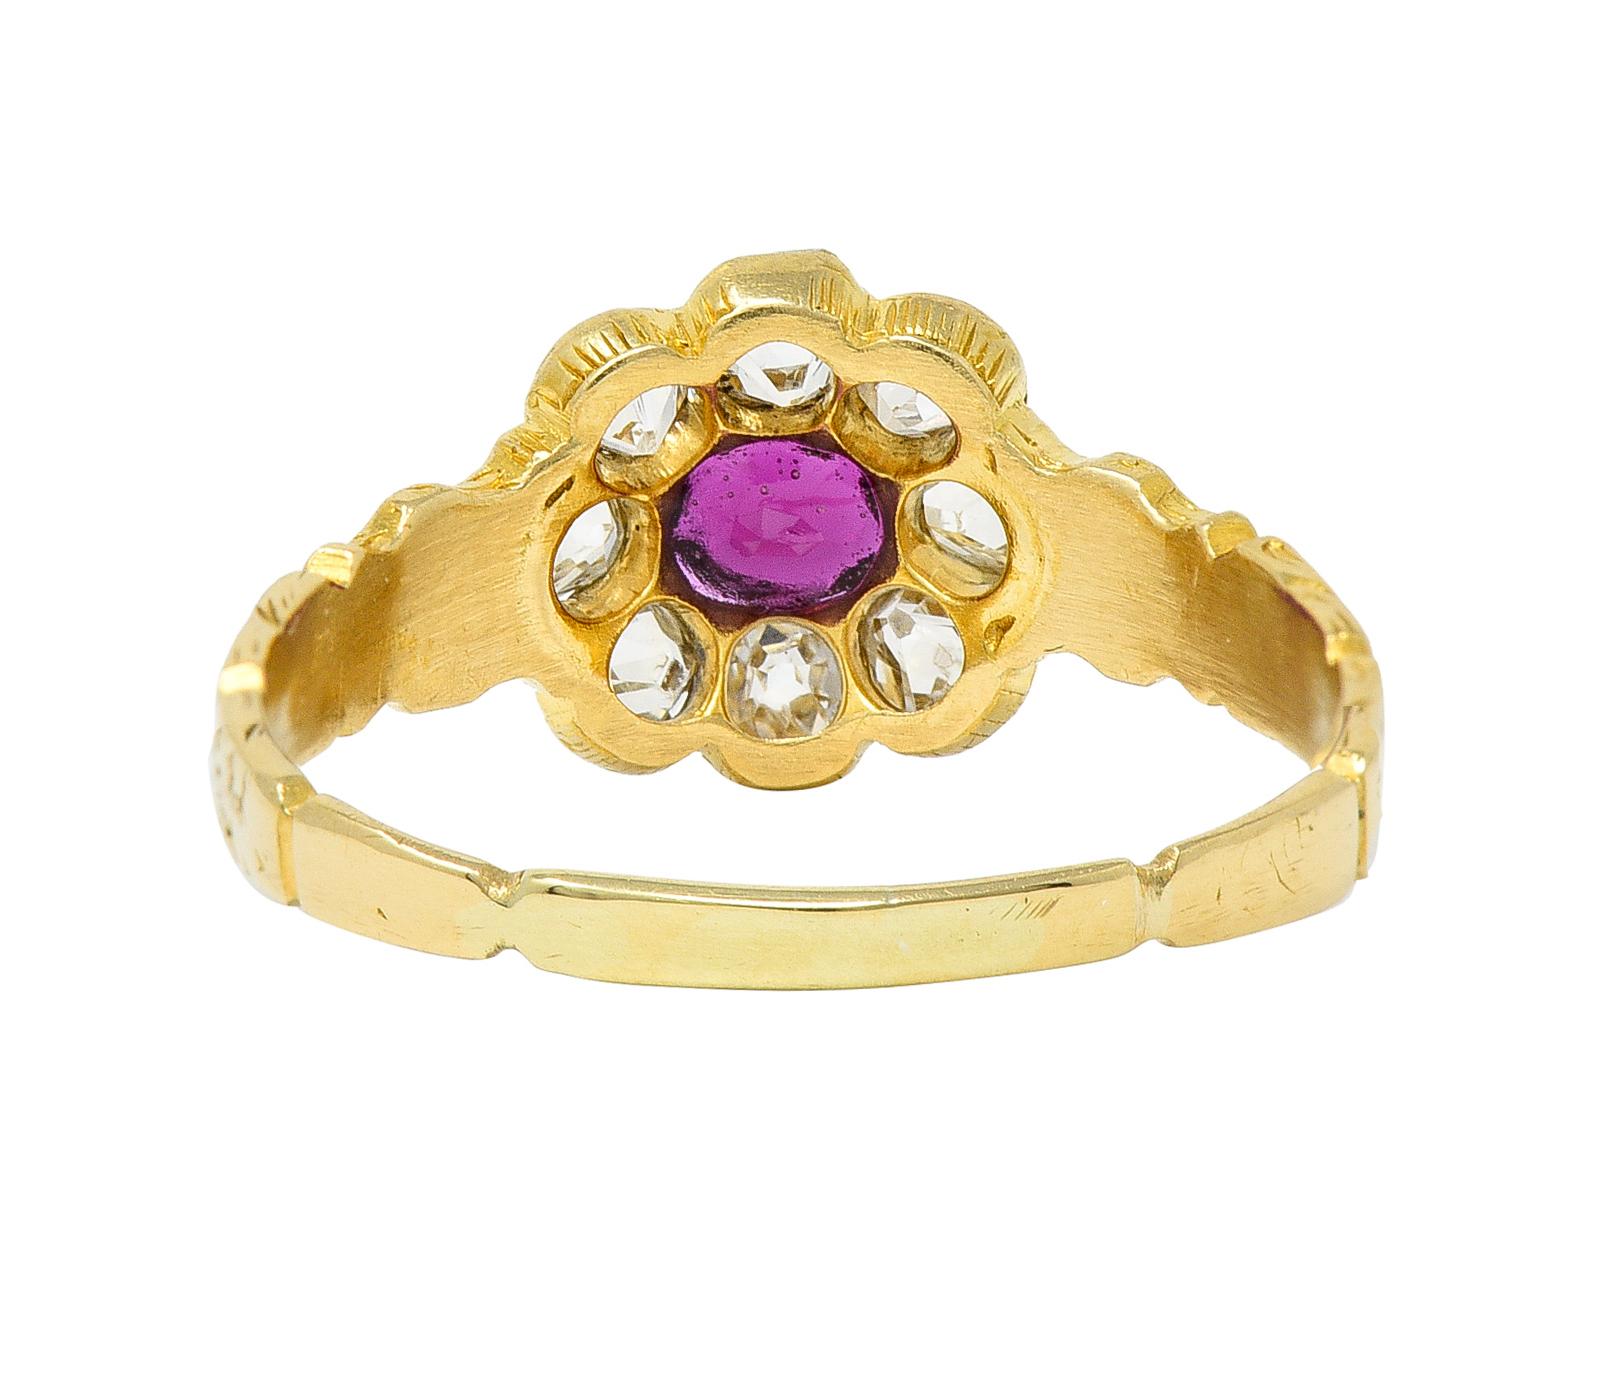 Victorian Cushion Cut Ruby Diamond 18 Karat Yellow Gold Antique Halo Ring In Excellent Condition For Sale In Philadelphia, PA